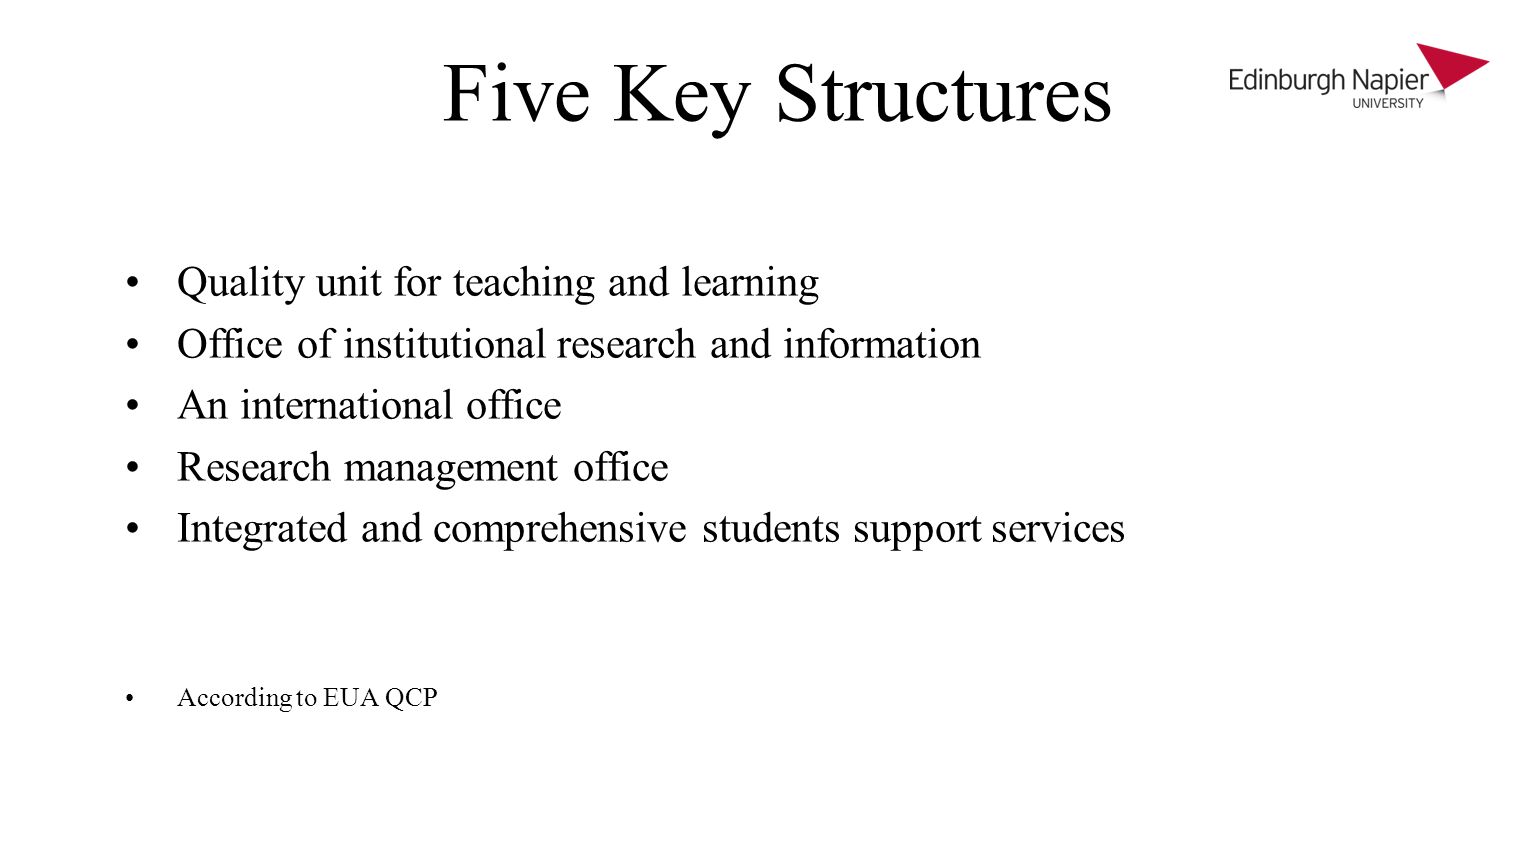 Five Key Structures Quality unit for teaching and learning Office of institutional research and information An international office Research management office Integrated and comprehensive students support services According to EUA QCP